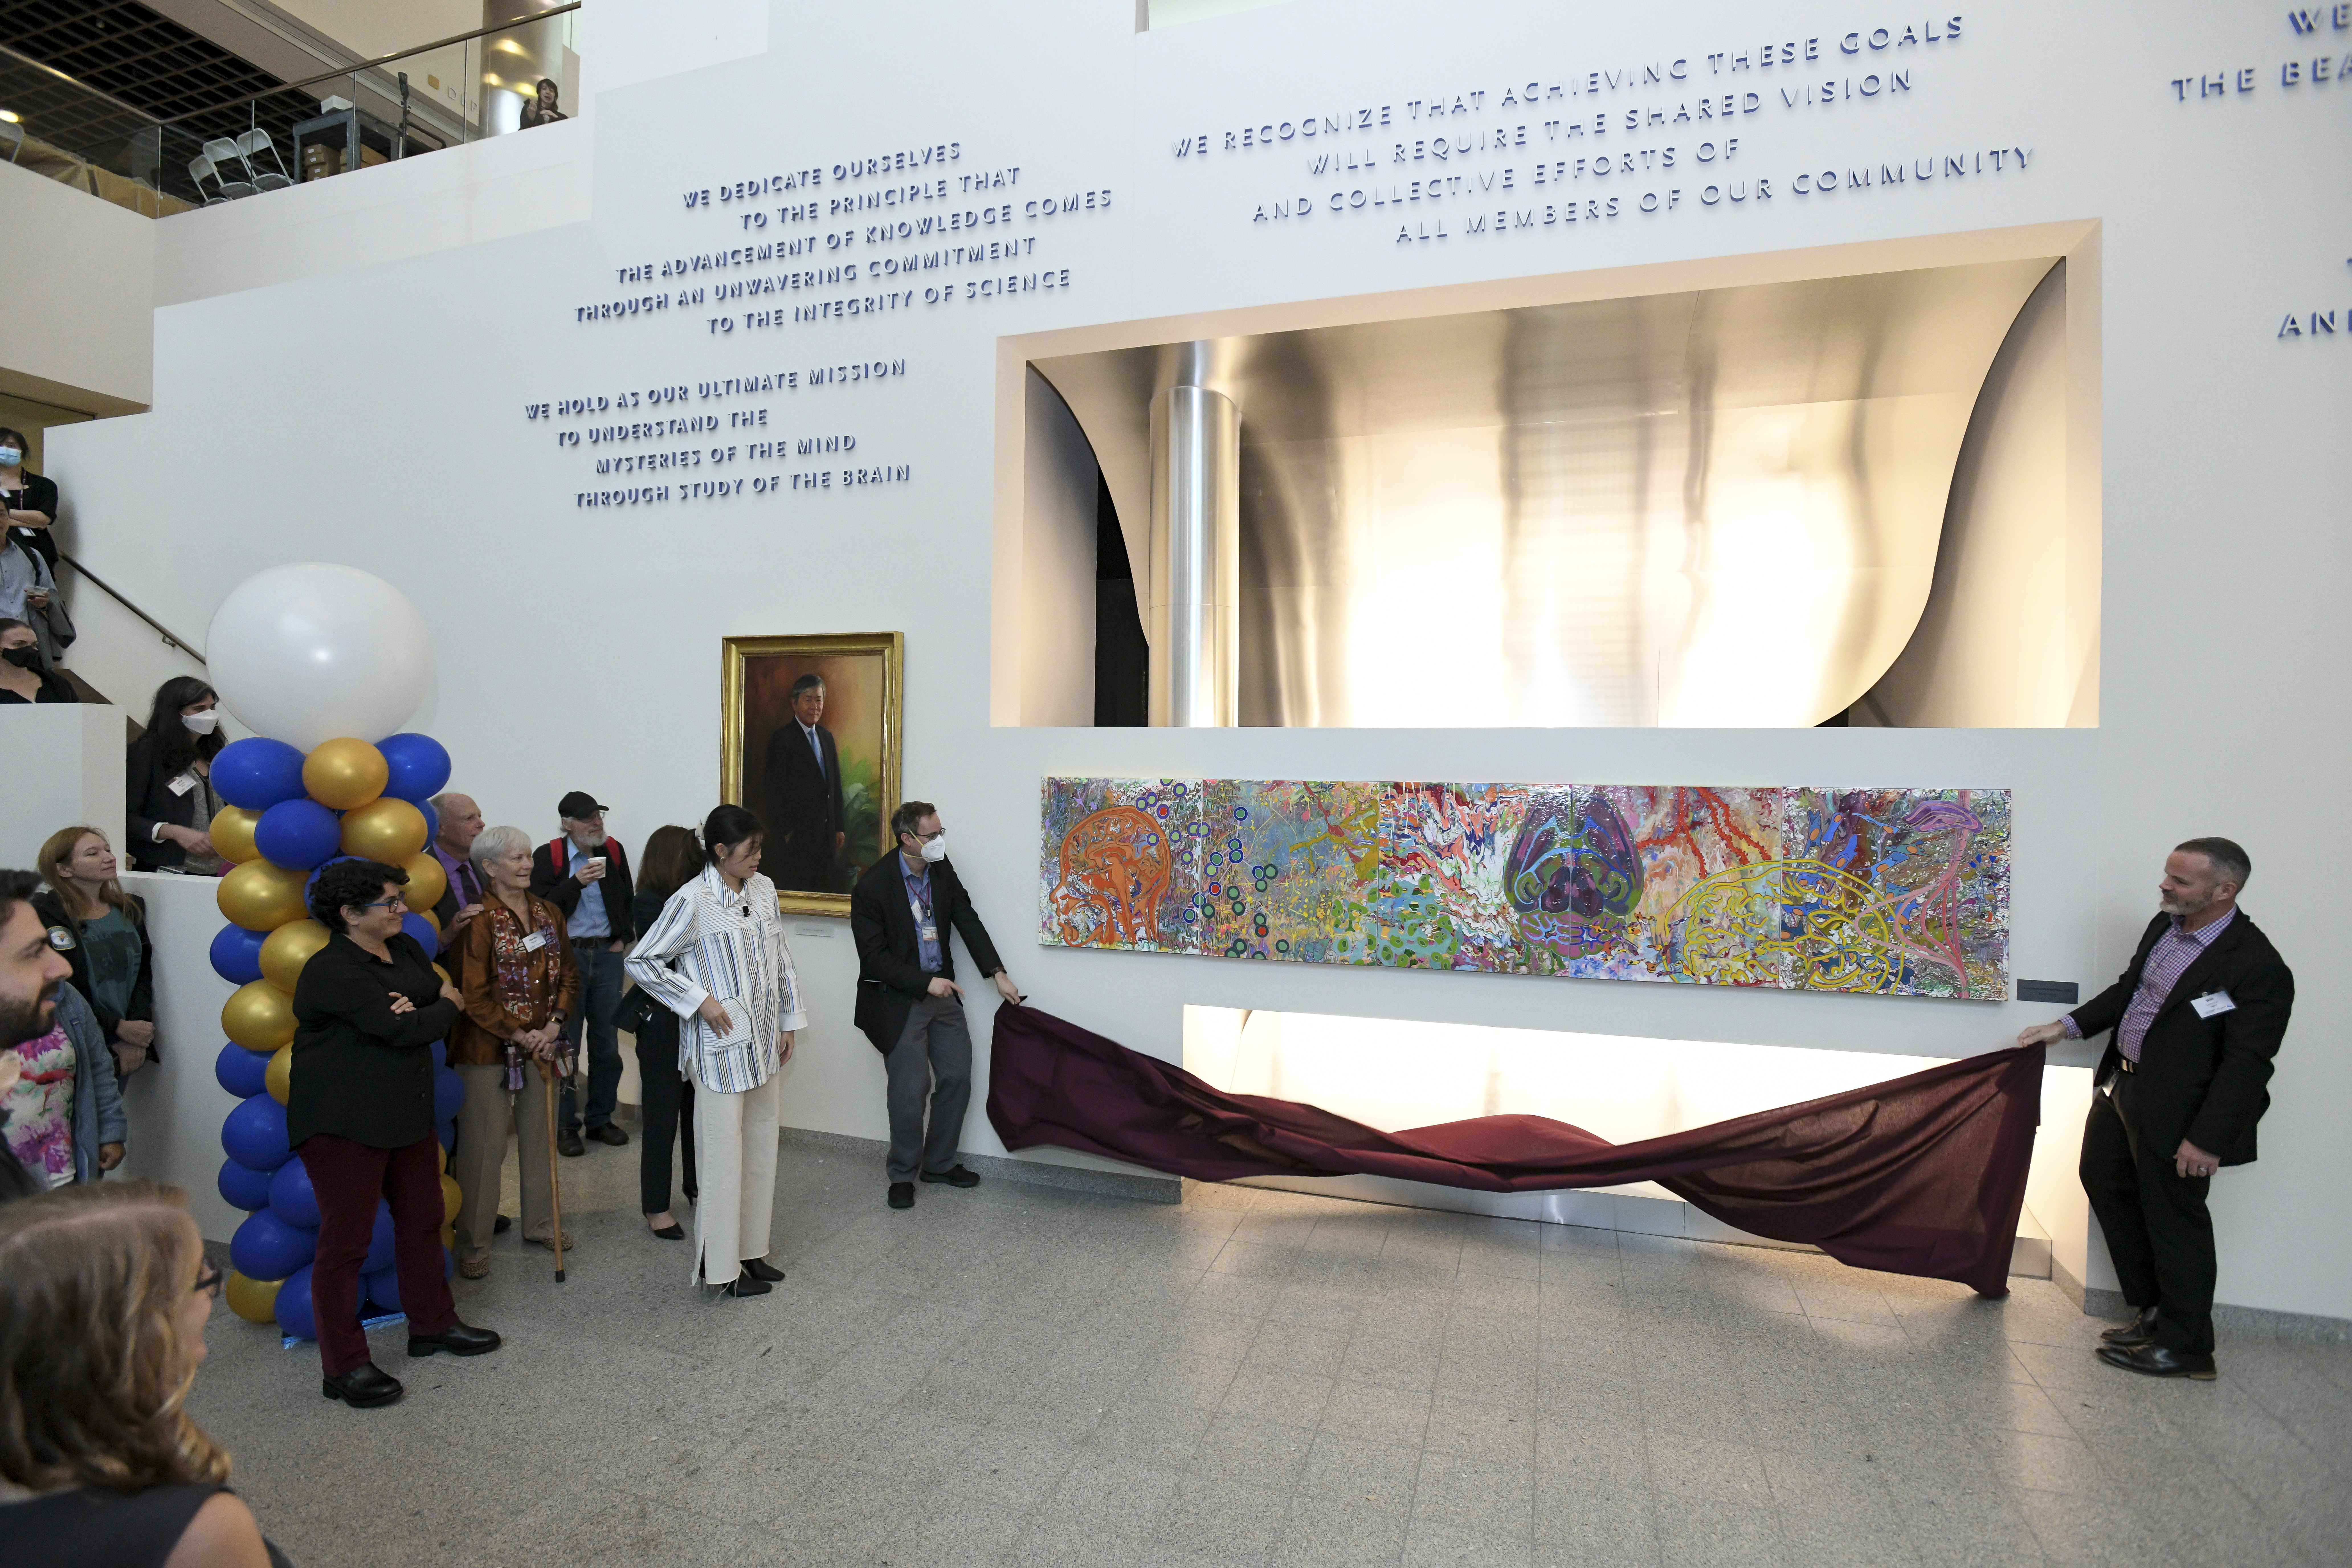 In the lobby of The Picower Institute in MIT's Building 46 two men hold a cloth under a wide, colorful painting composed of neuroscience imagery. Mila Sheng, the artist, stands nearby. To her right is Nergis Mavalvala. Standing behind them are many onlookers and a tall column of blue, gold and white balloons.